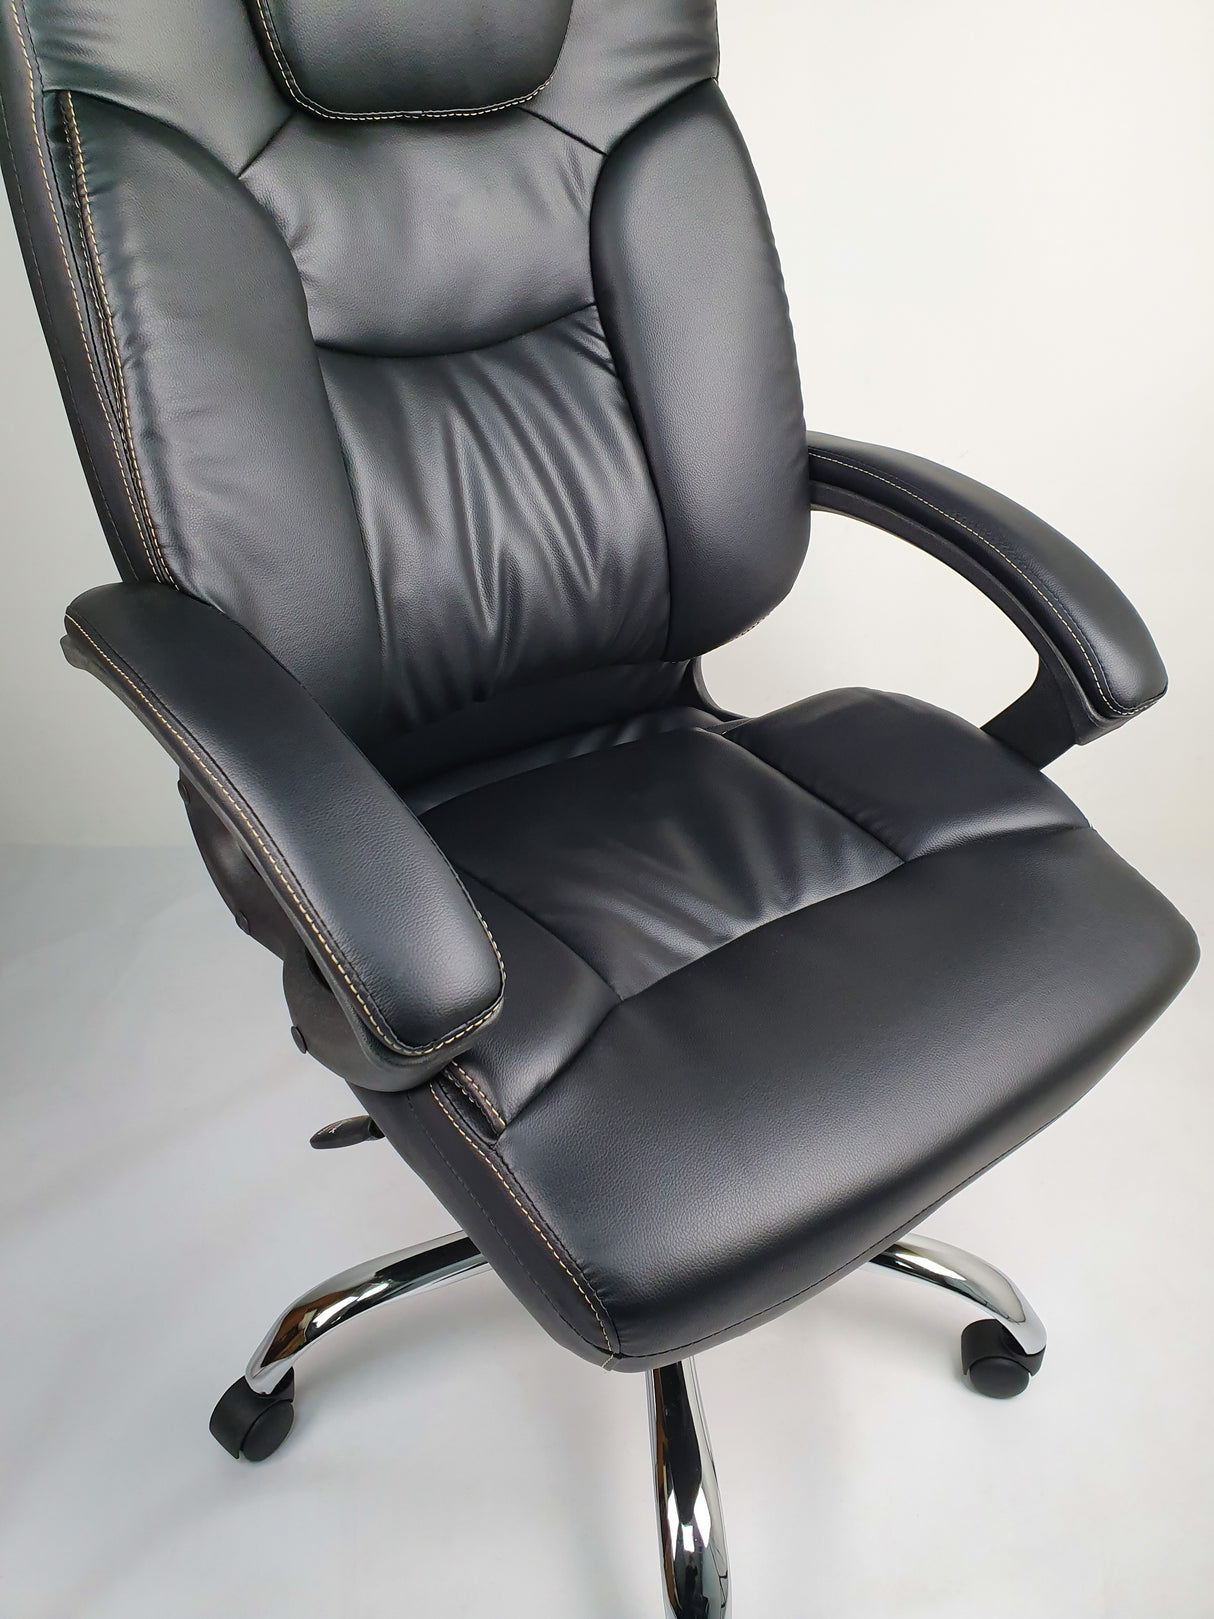 Black Leather Executive Office Chair - HF459